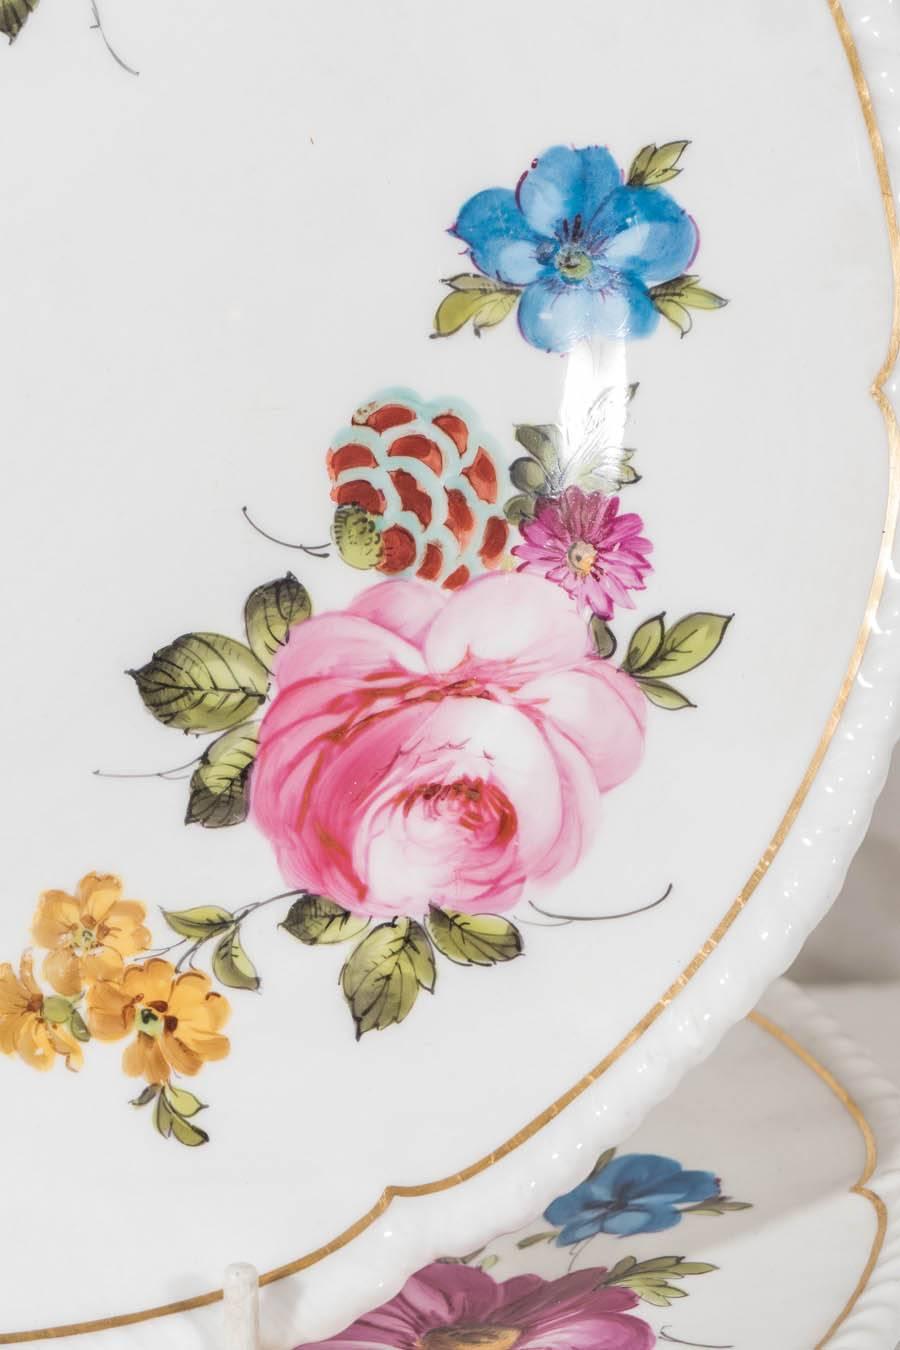 Romantic Antique Porcelain Dishes Each Hand-Painted with Roses on White Porcelain